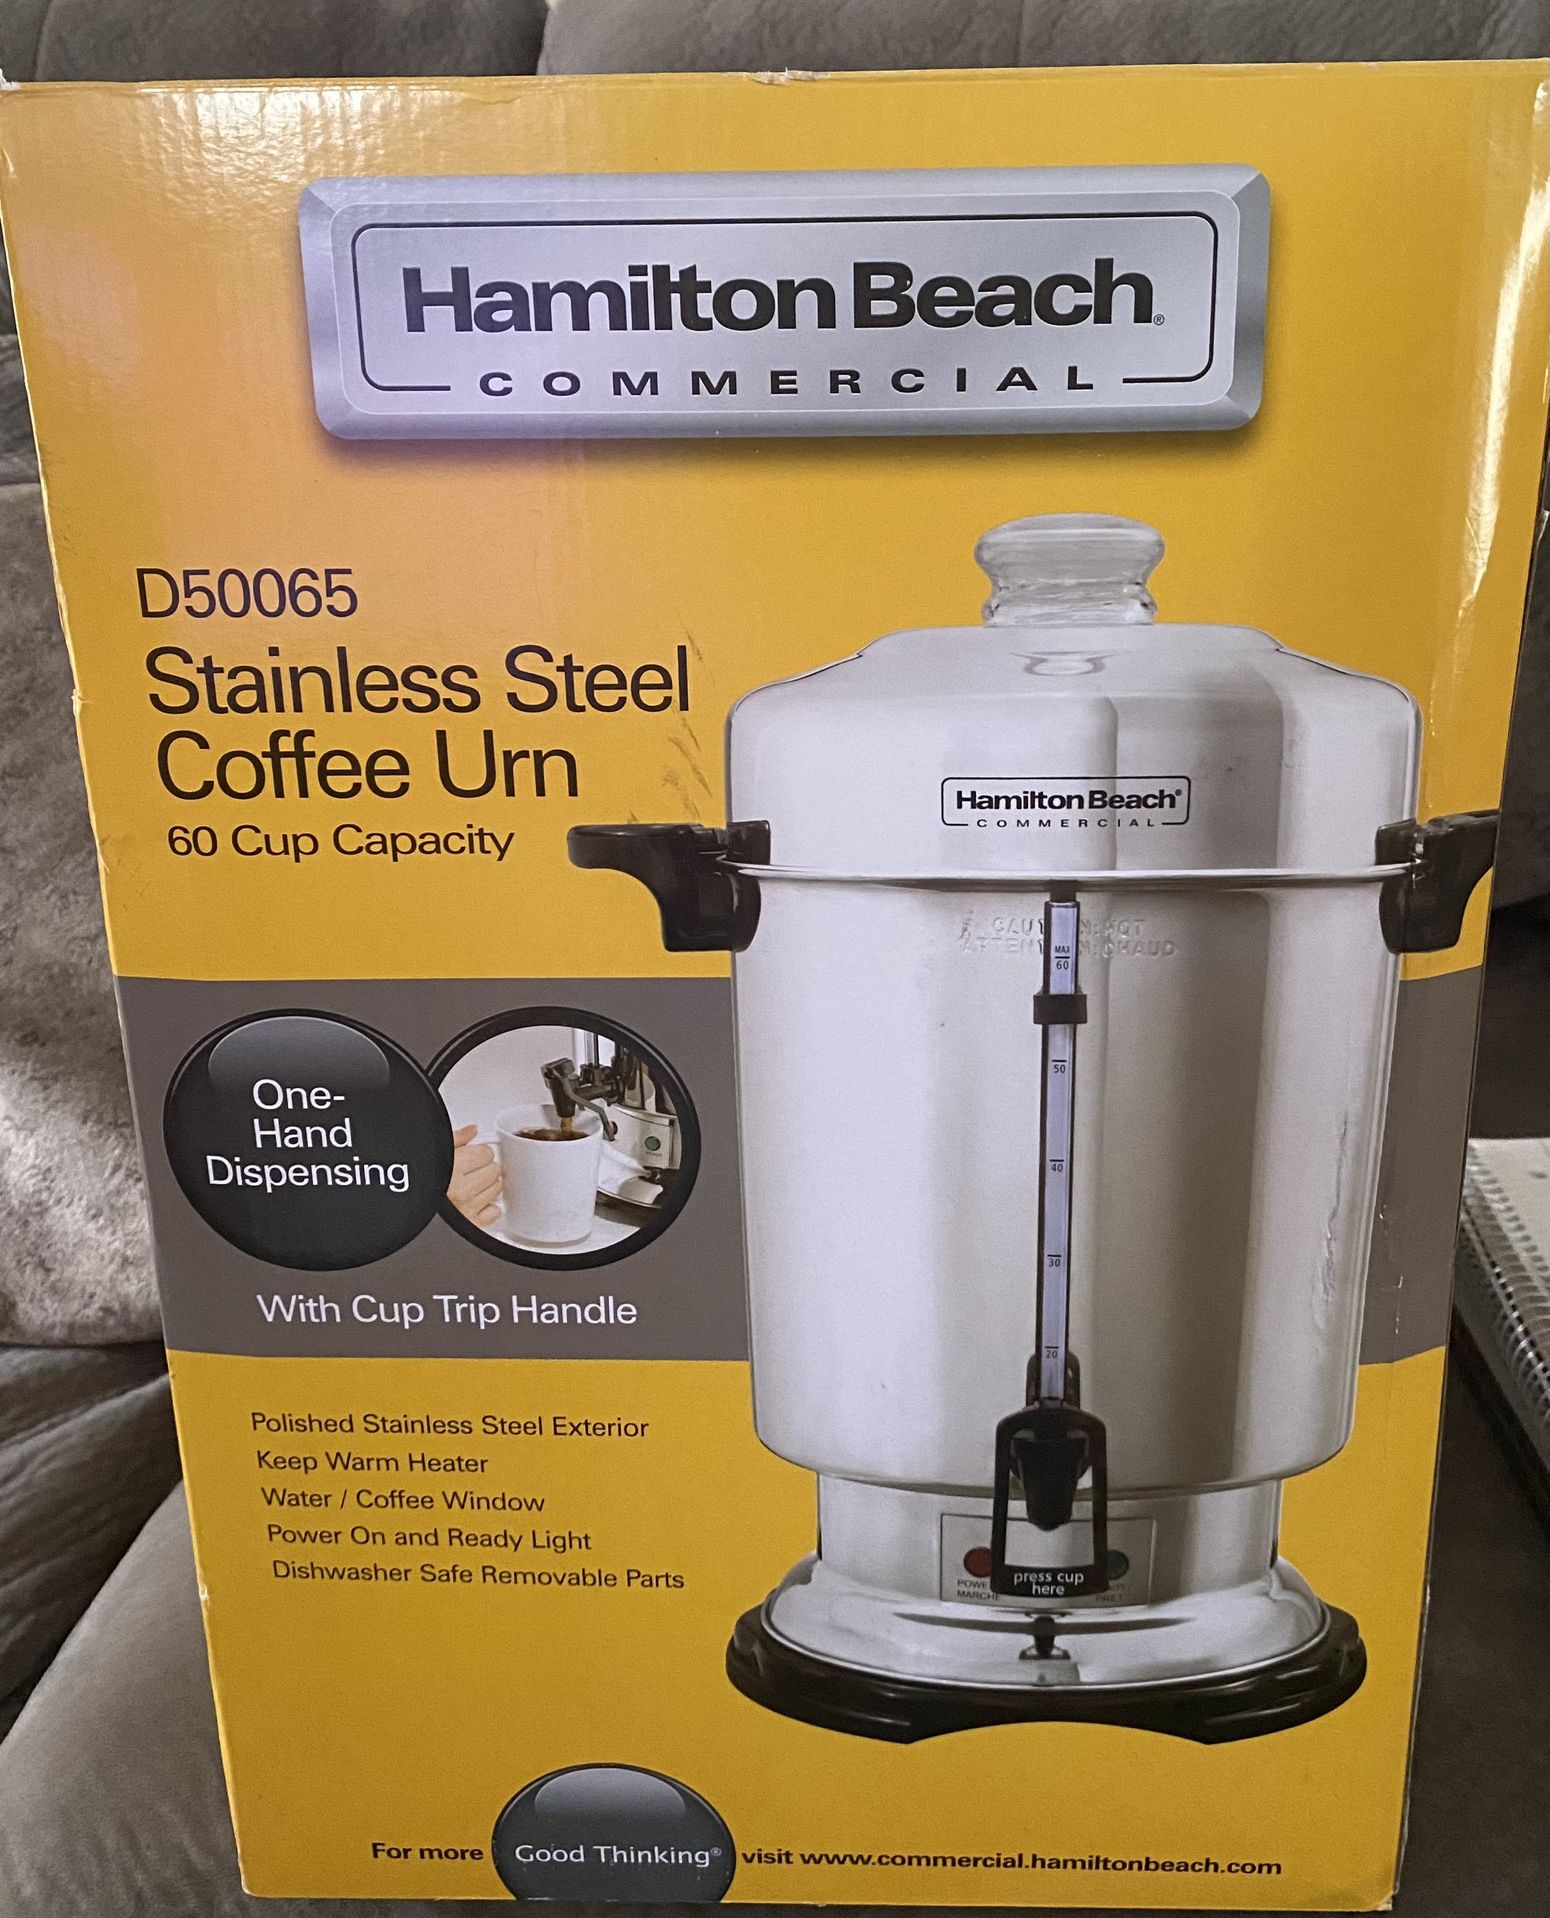 NEW Hamilton Beach Commercial D50065 Stainless Steel Coffee Urn